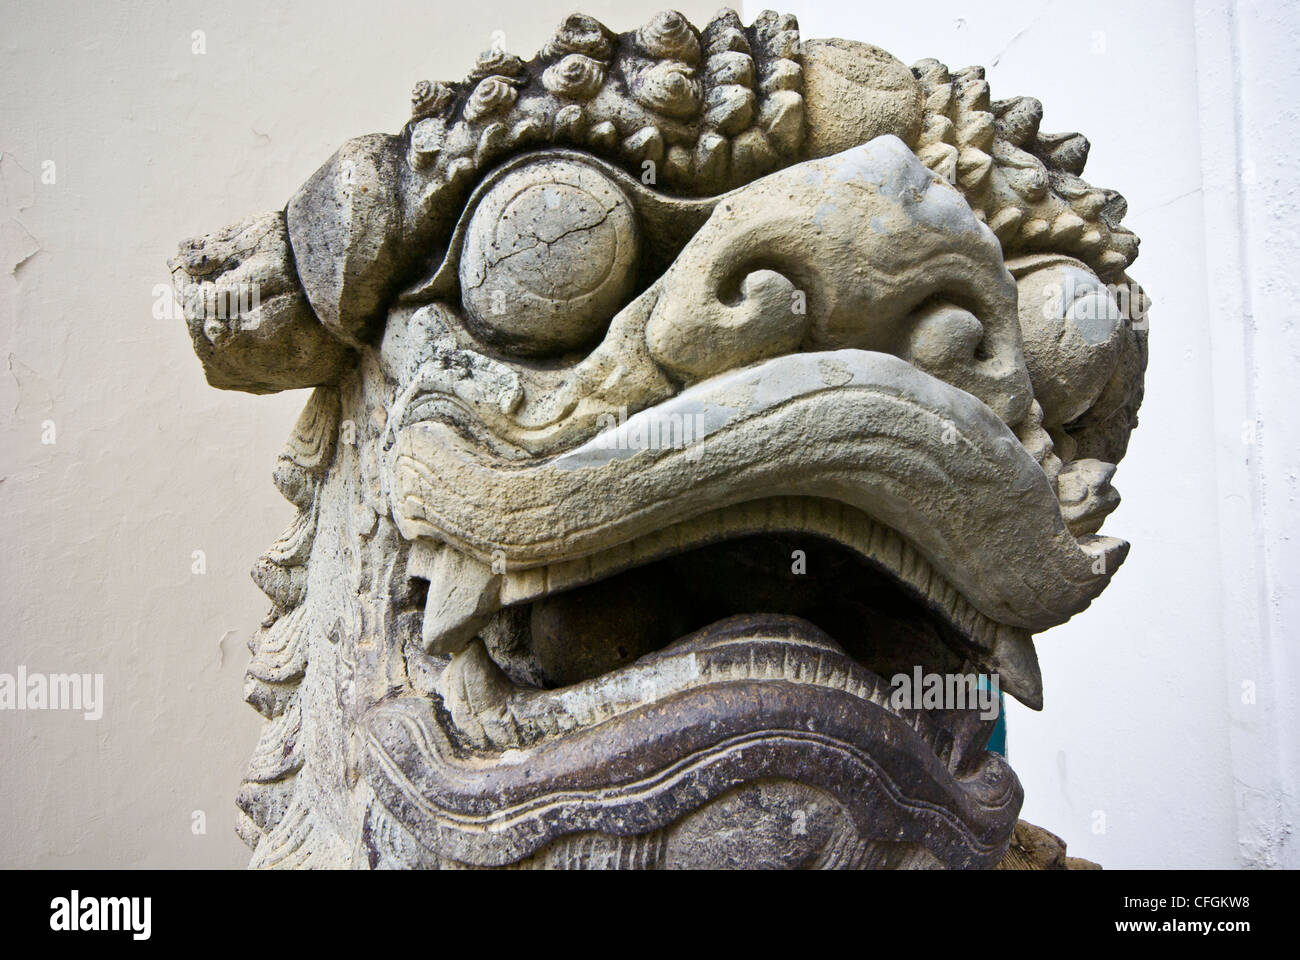 A stone statue of a fearsome lions head displaying sharp canine teeth. Stock Photo